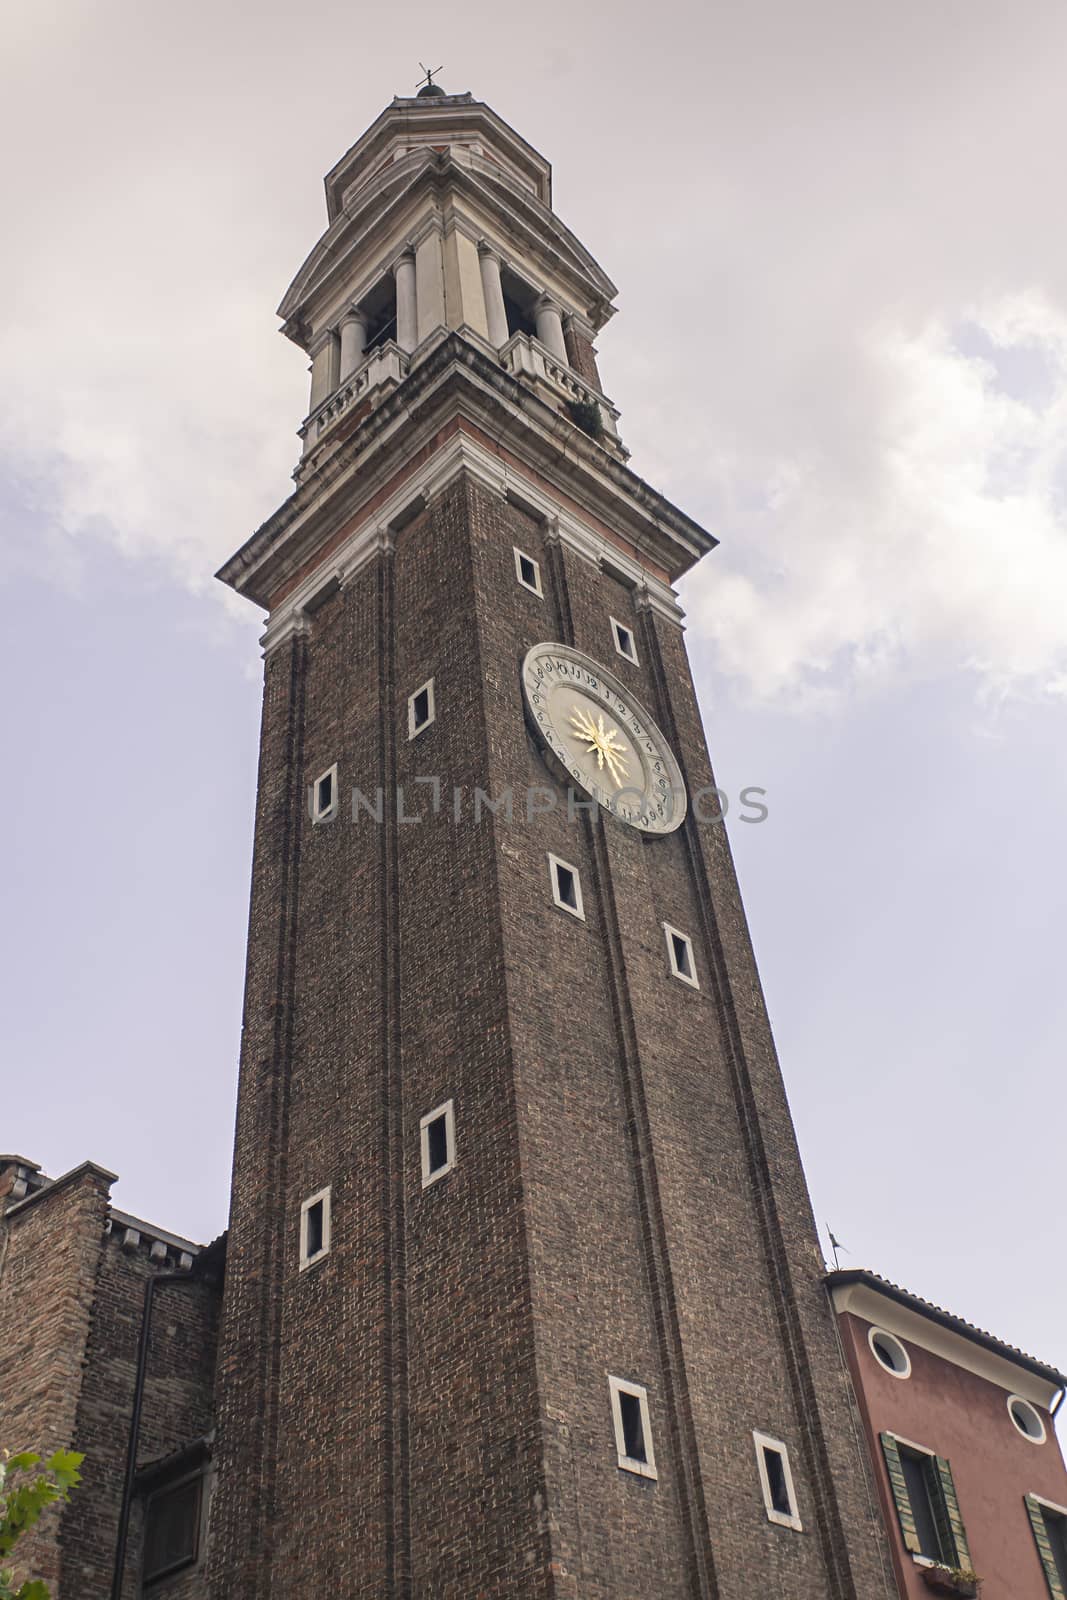 Deatil of Santi Apostoli bell tower in Venice in Italy